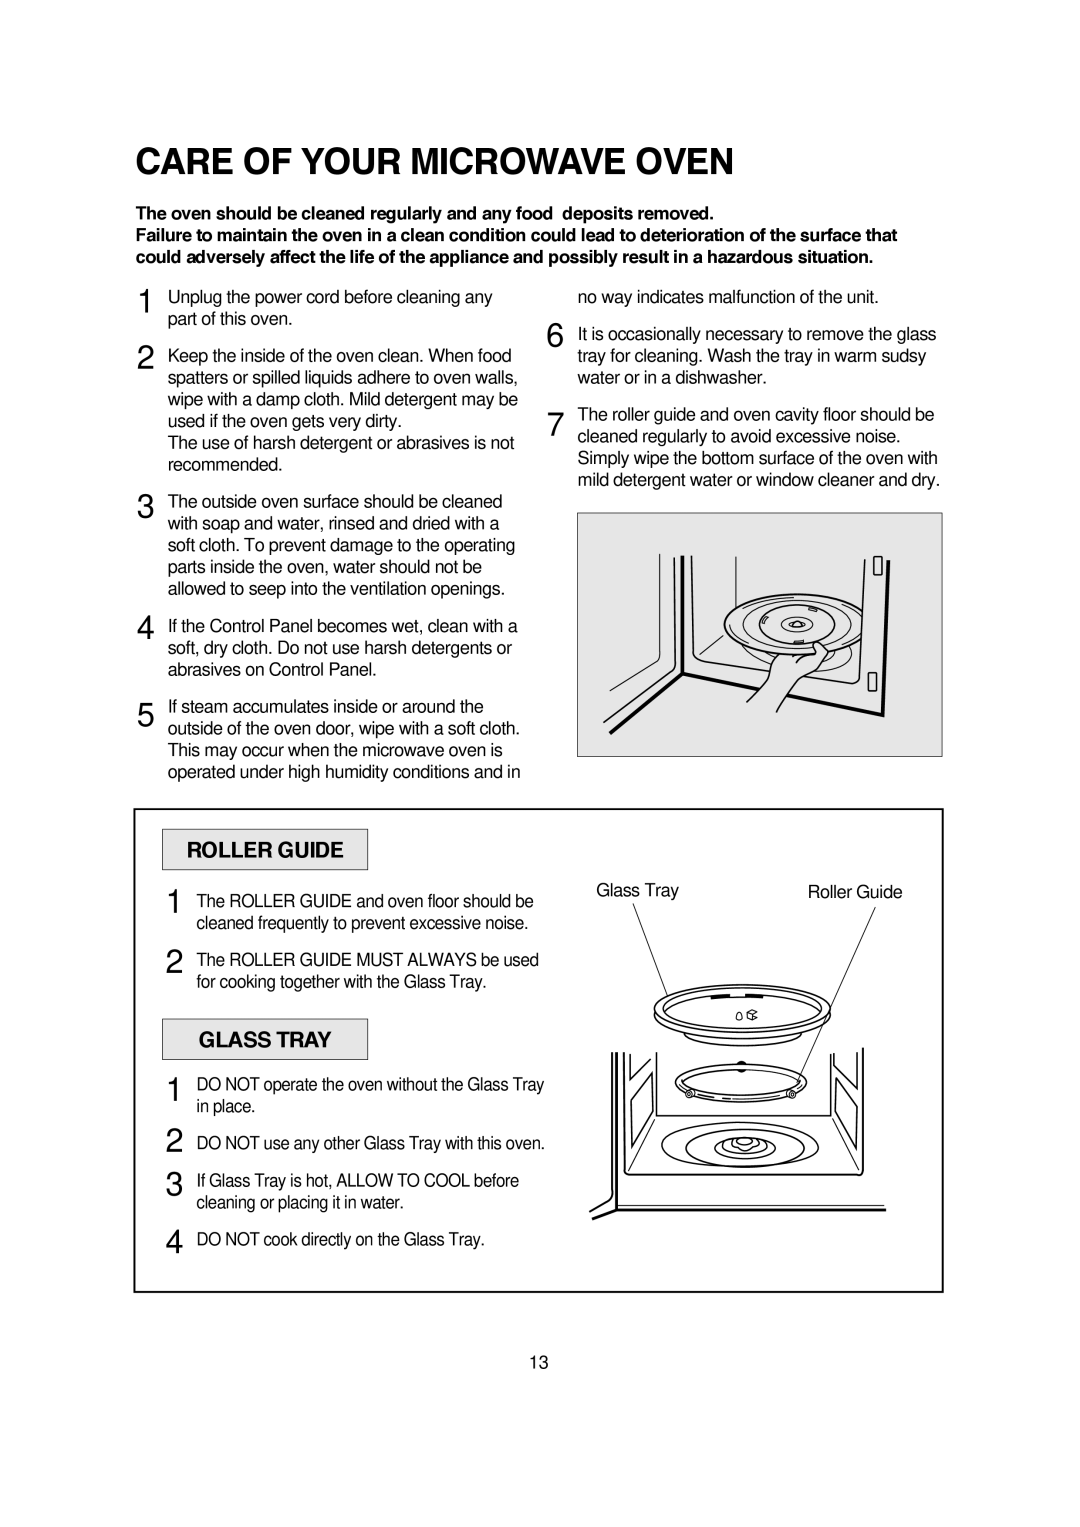 Magic Chef MCM1110W/B instruction manual Care Of Your Microwave Oven, Roller Guide, Glass Tray 